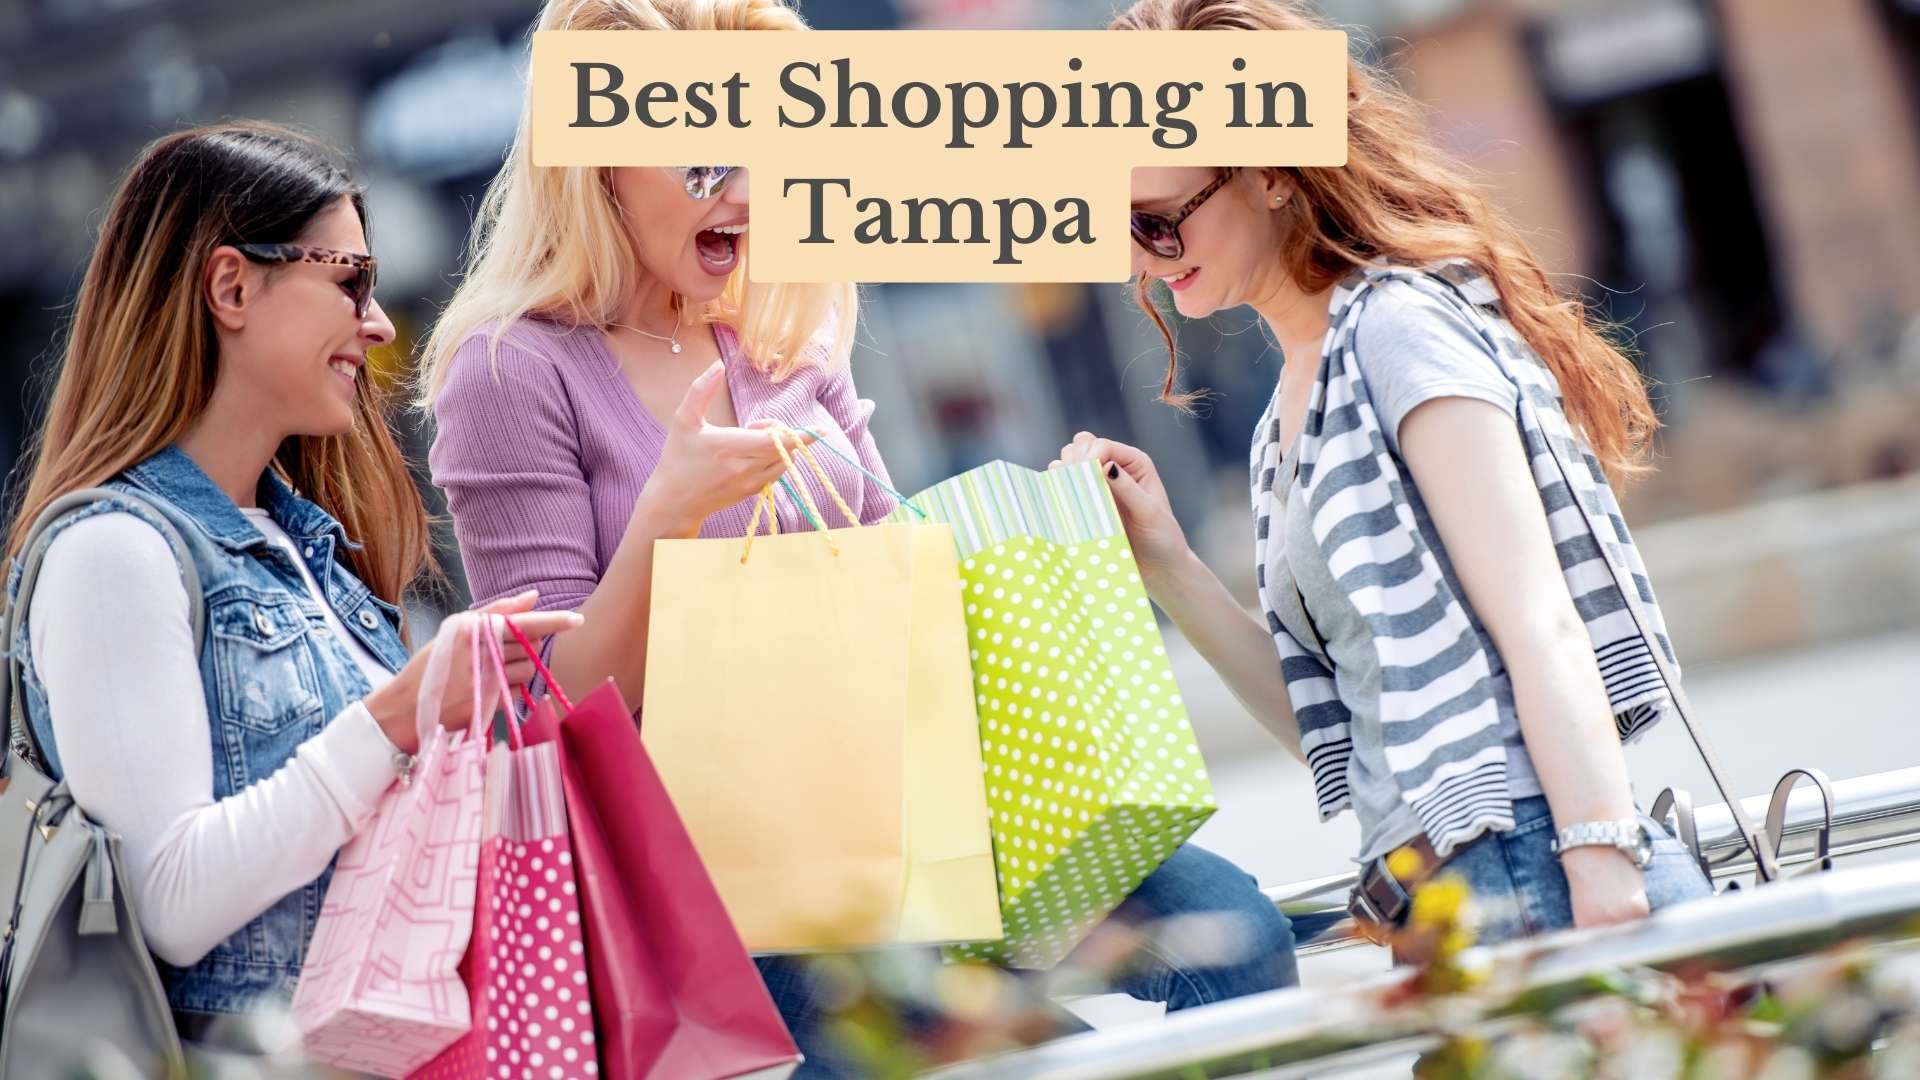 Insider's Tour: 9 Best Shopping in Tampa, FL for Fashion & Fun